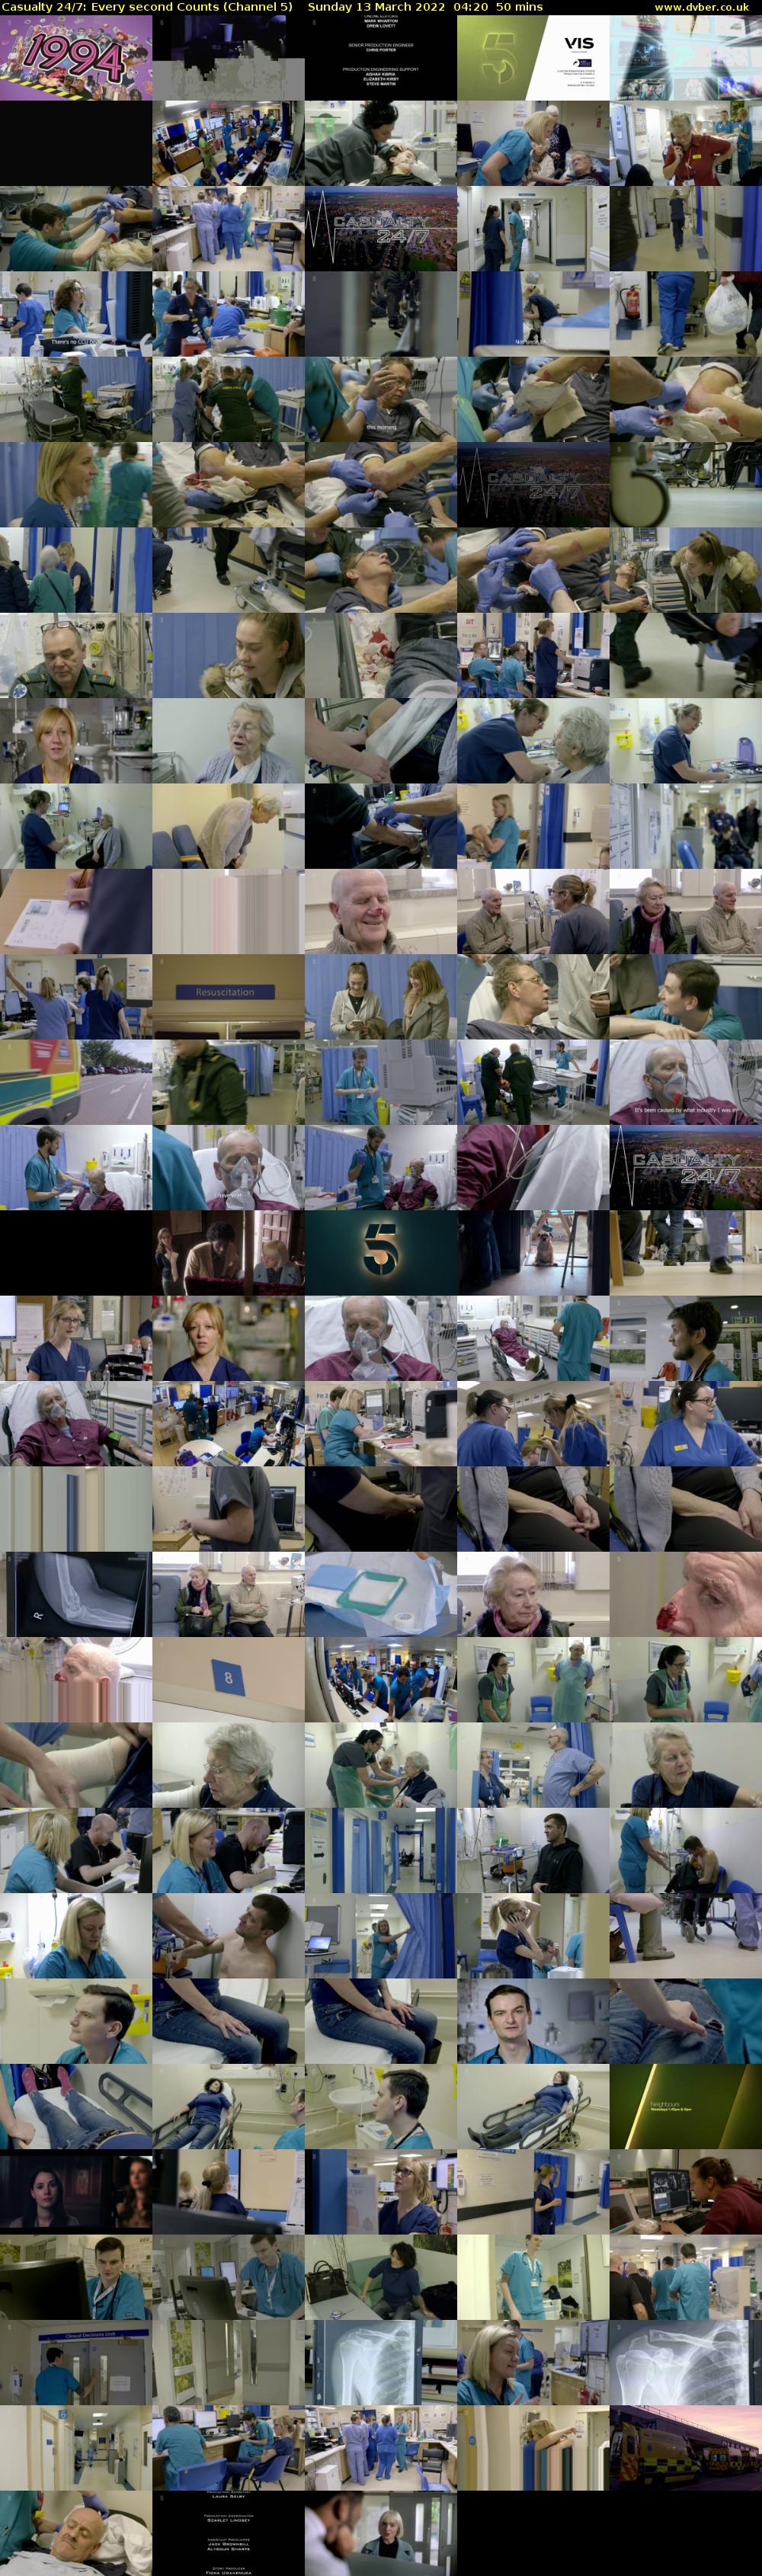 Casualty 24/7: Every second Counts (Channel 5) Sunday 13 March 2022 04:20 - 05:10